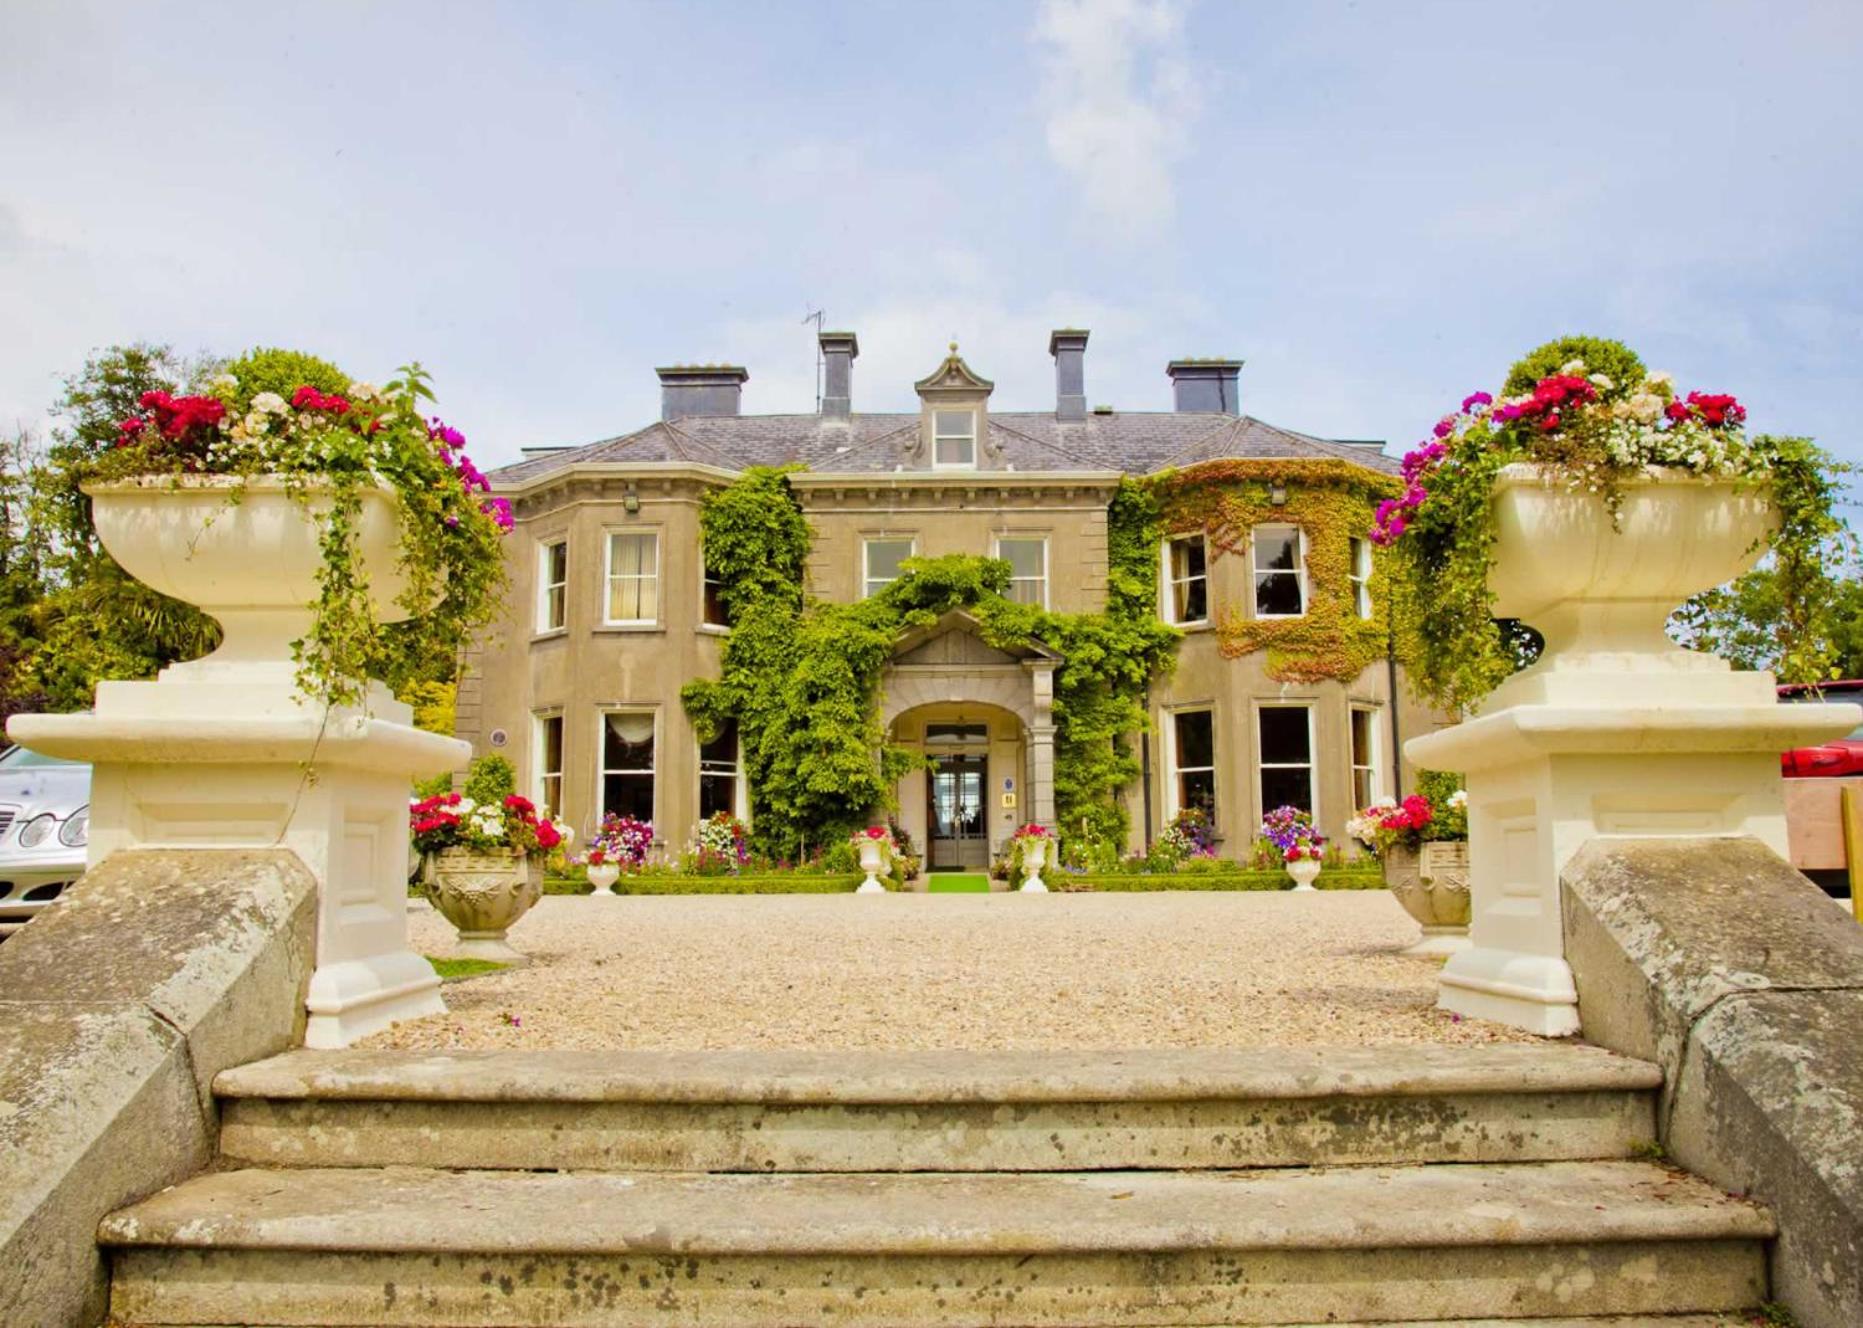 Tinakilly Country House Hotel & Gardens